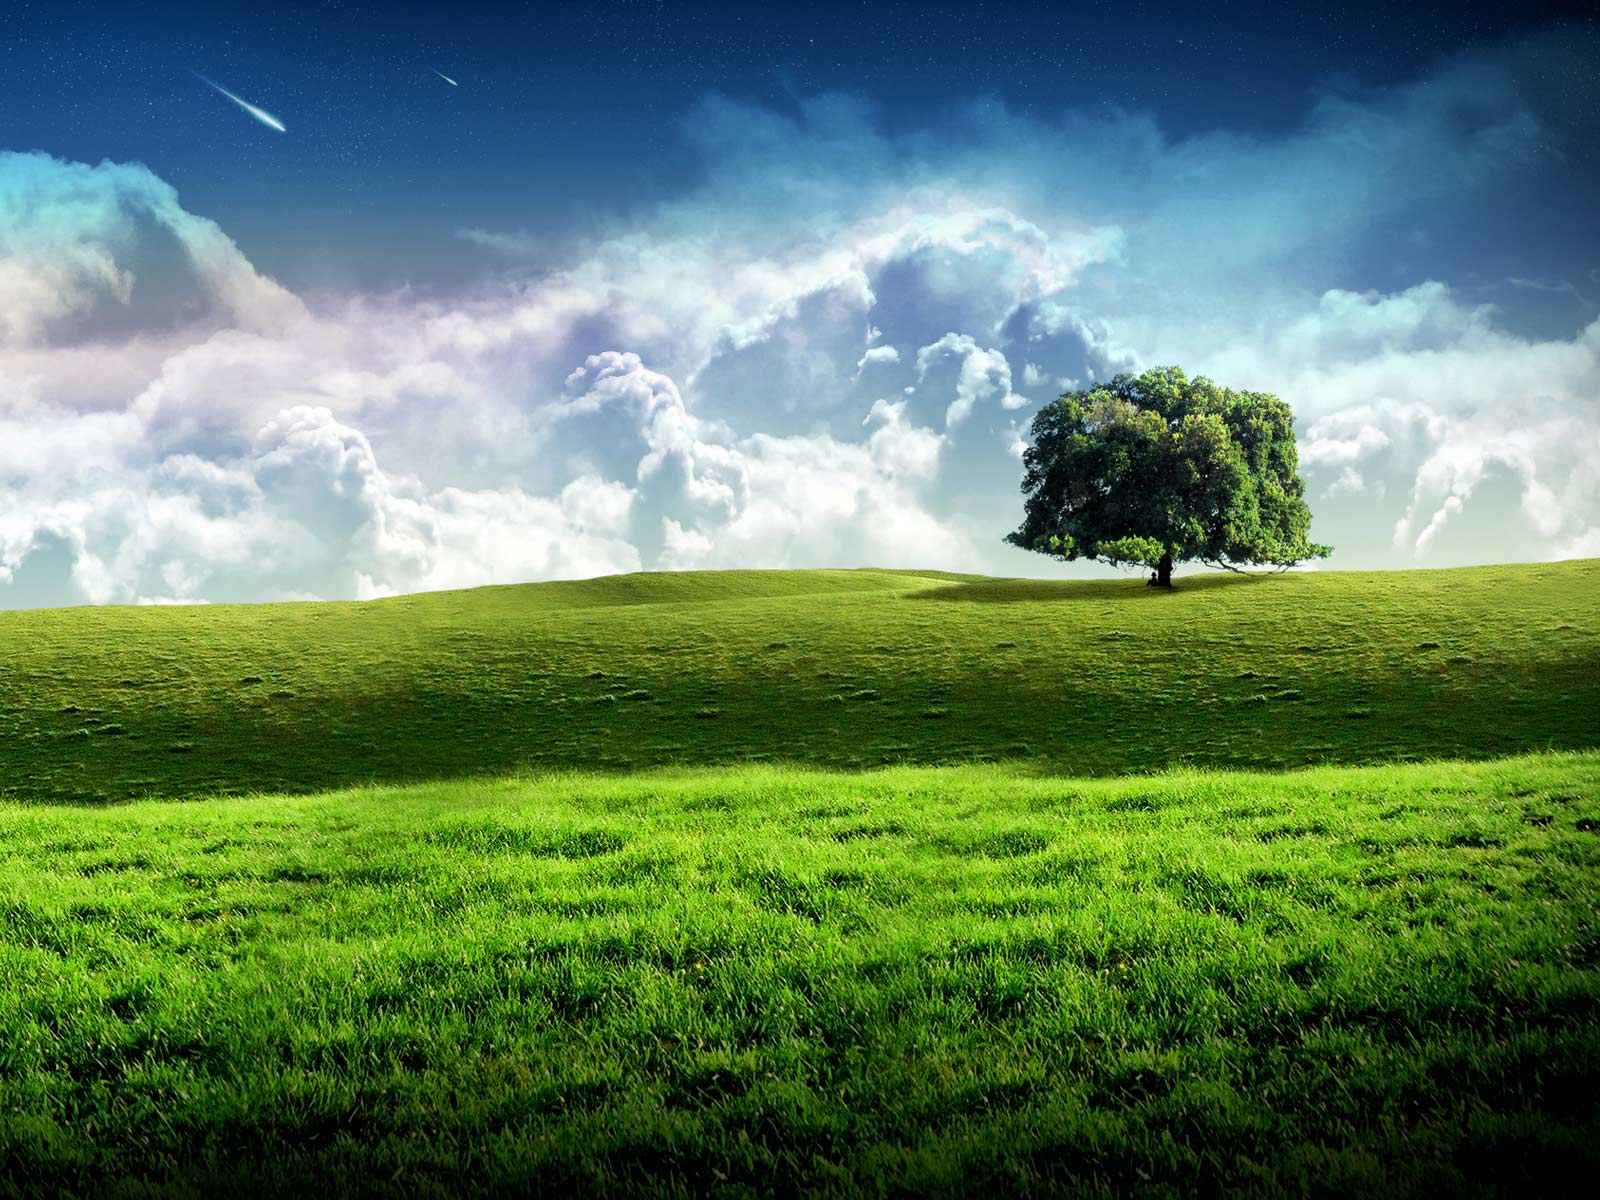 New Bliss Tree Green Landscape Scenery Wallpaper Free Images at